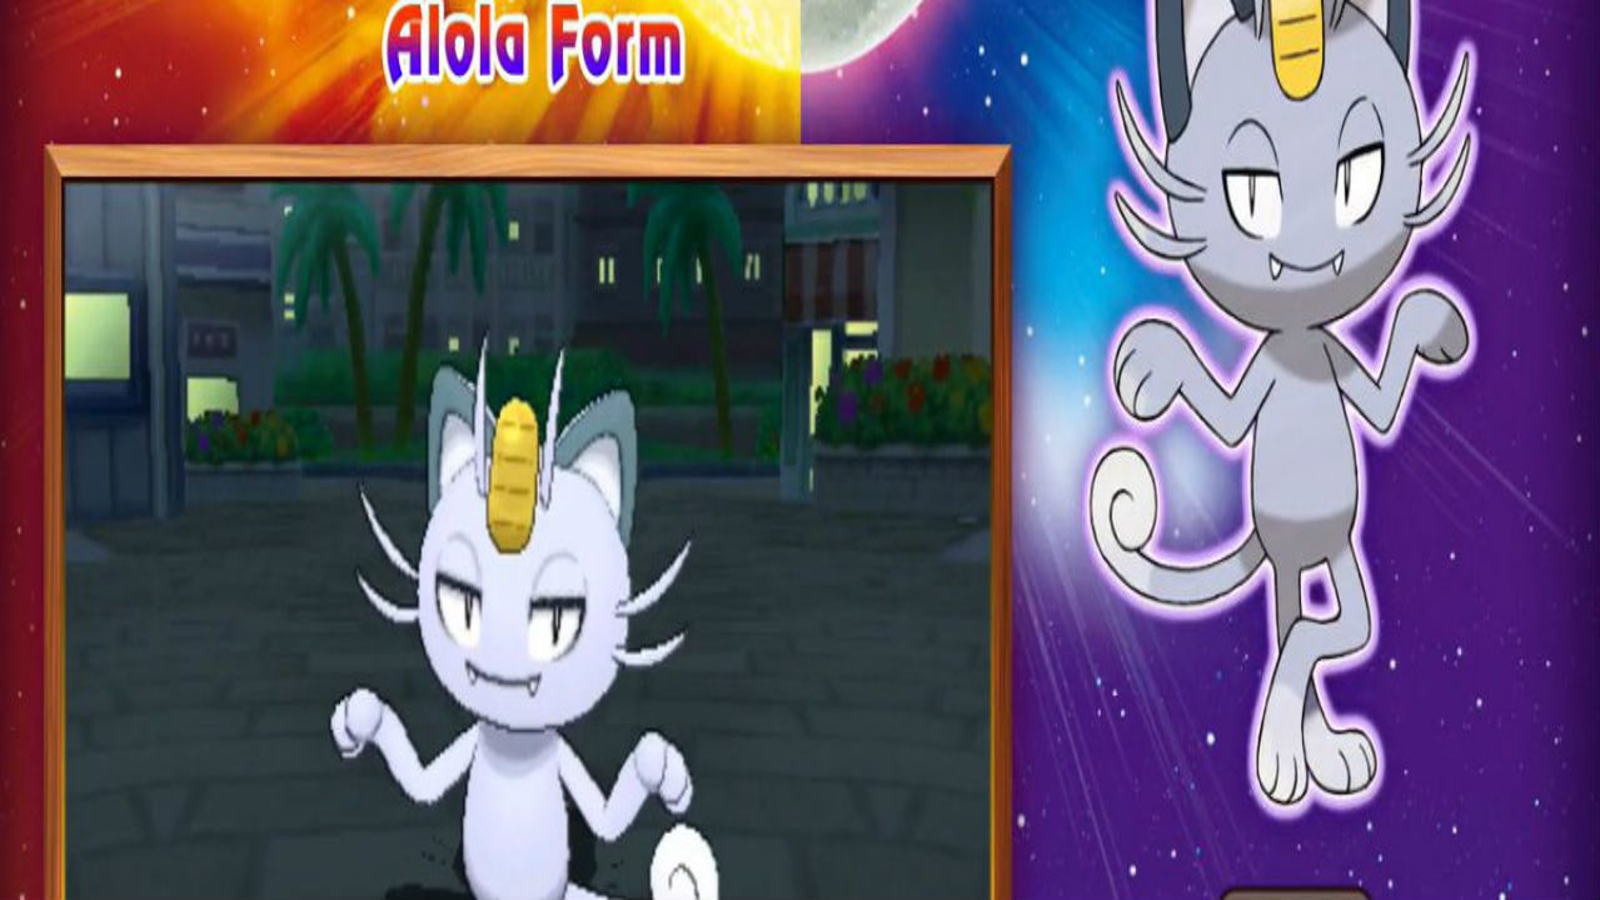 Pokémon GO: Alolan Forms From The Kanto Region Are Coming